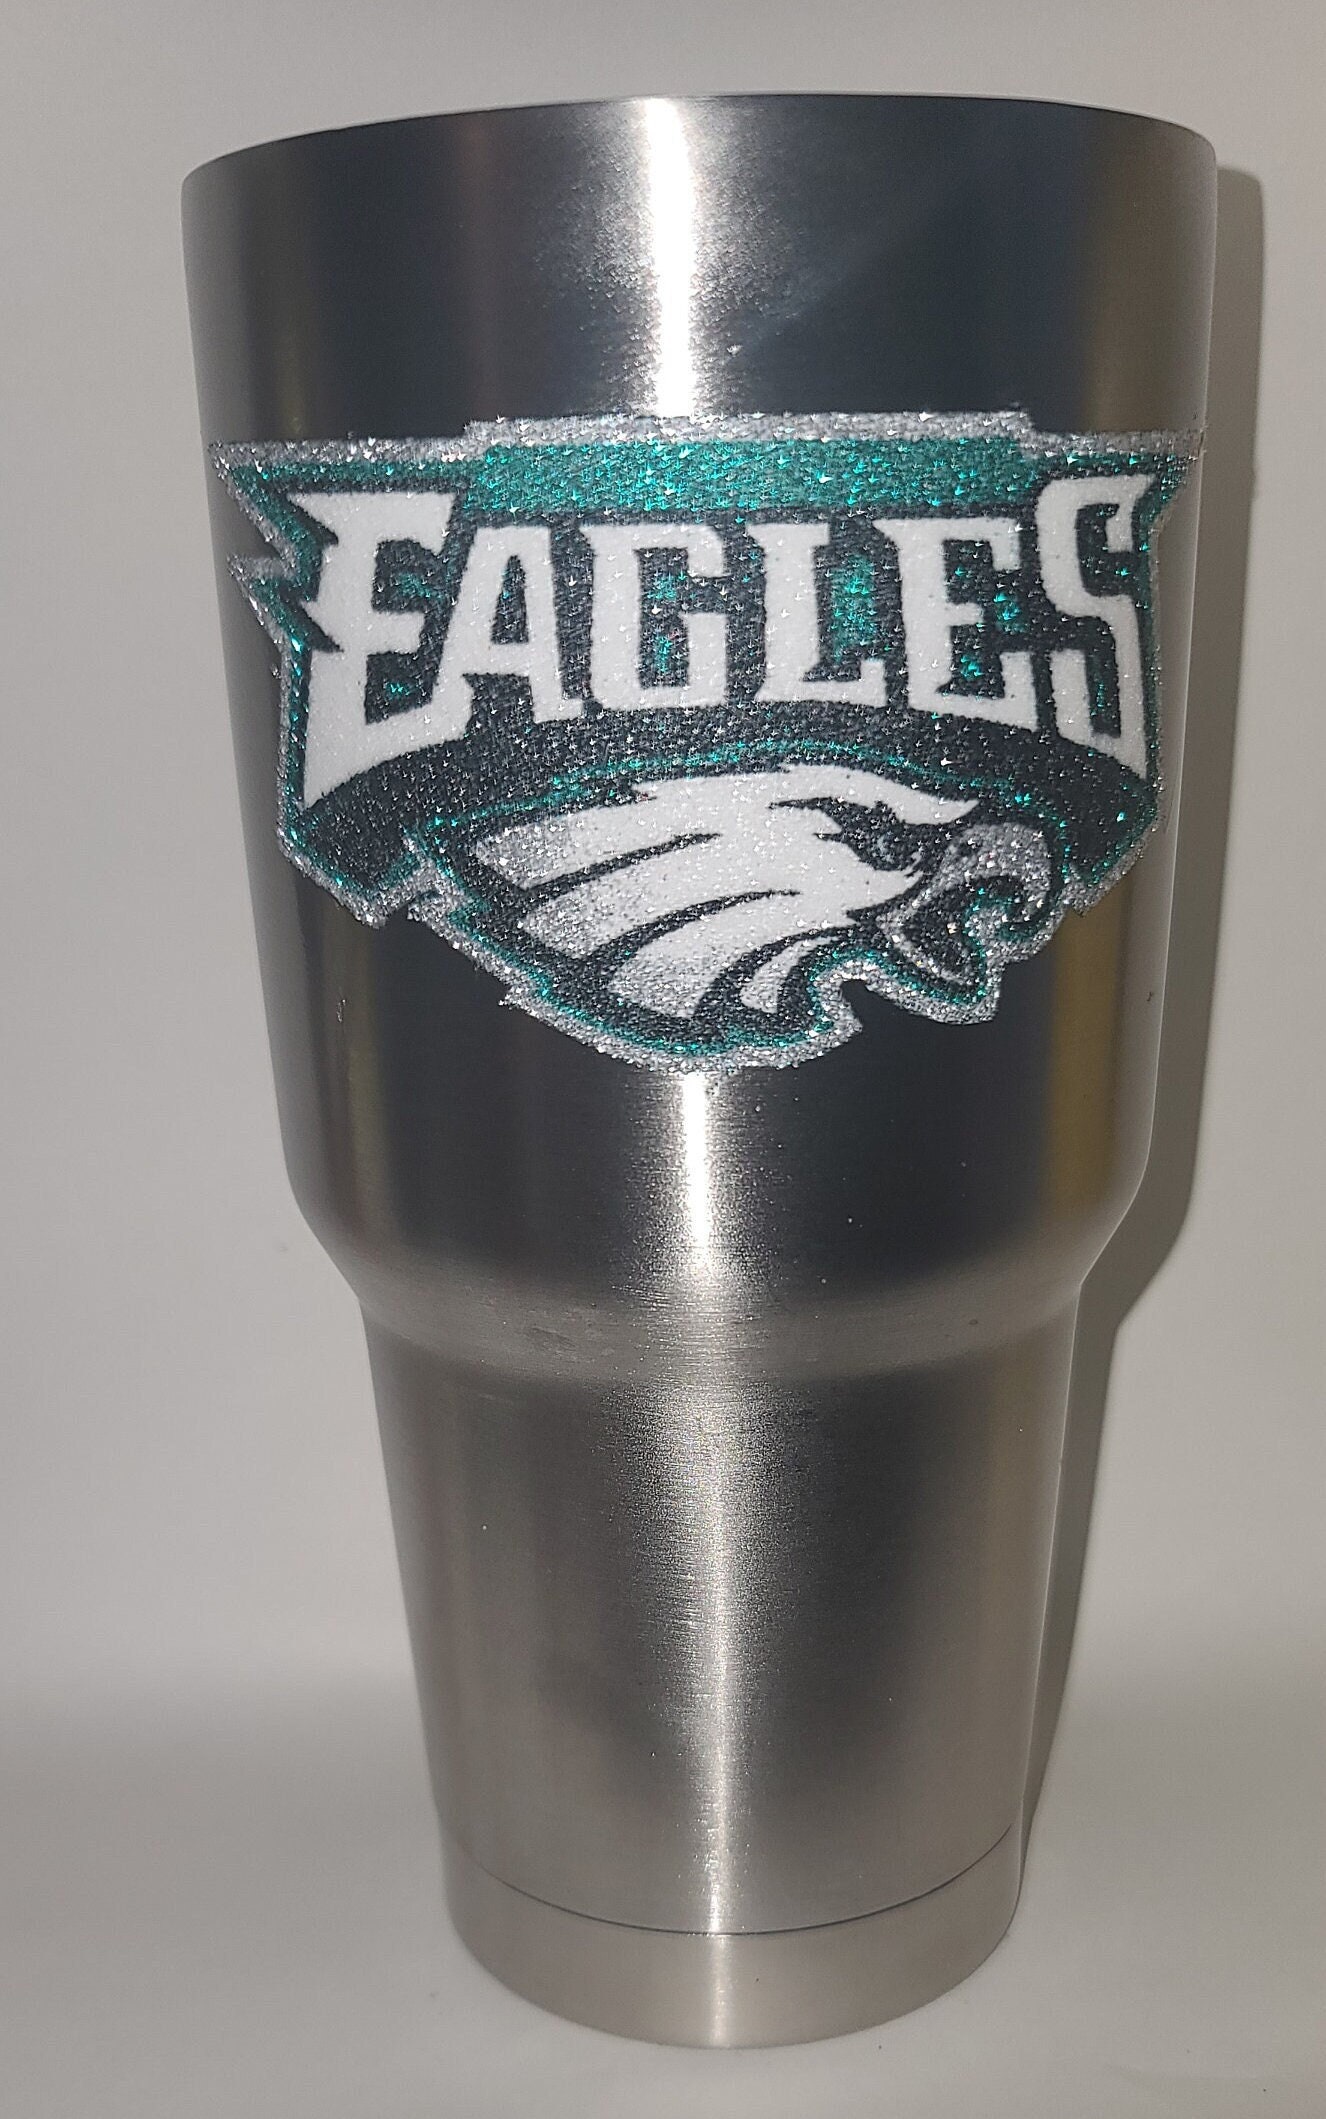 Philadelphia Eagles YETI Laser Engraved Tumblers, Can Colsters, and Bottles